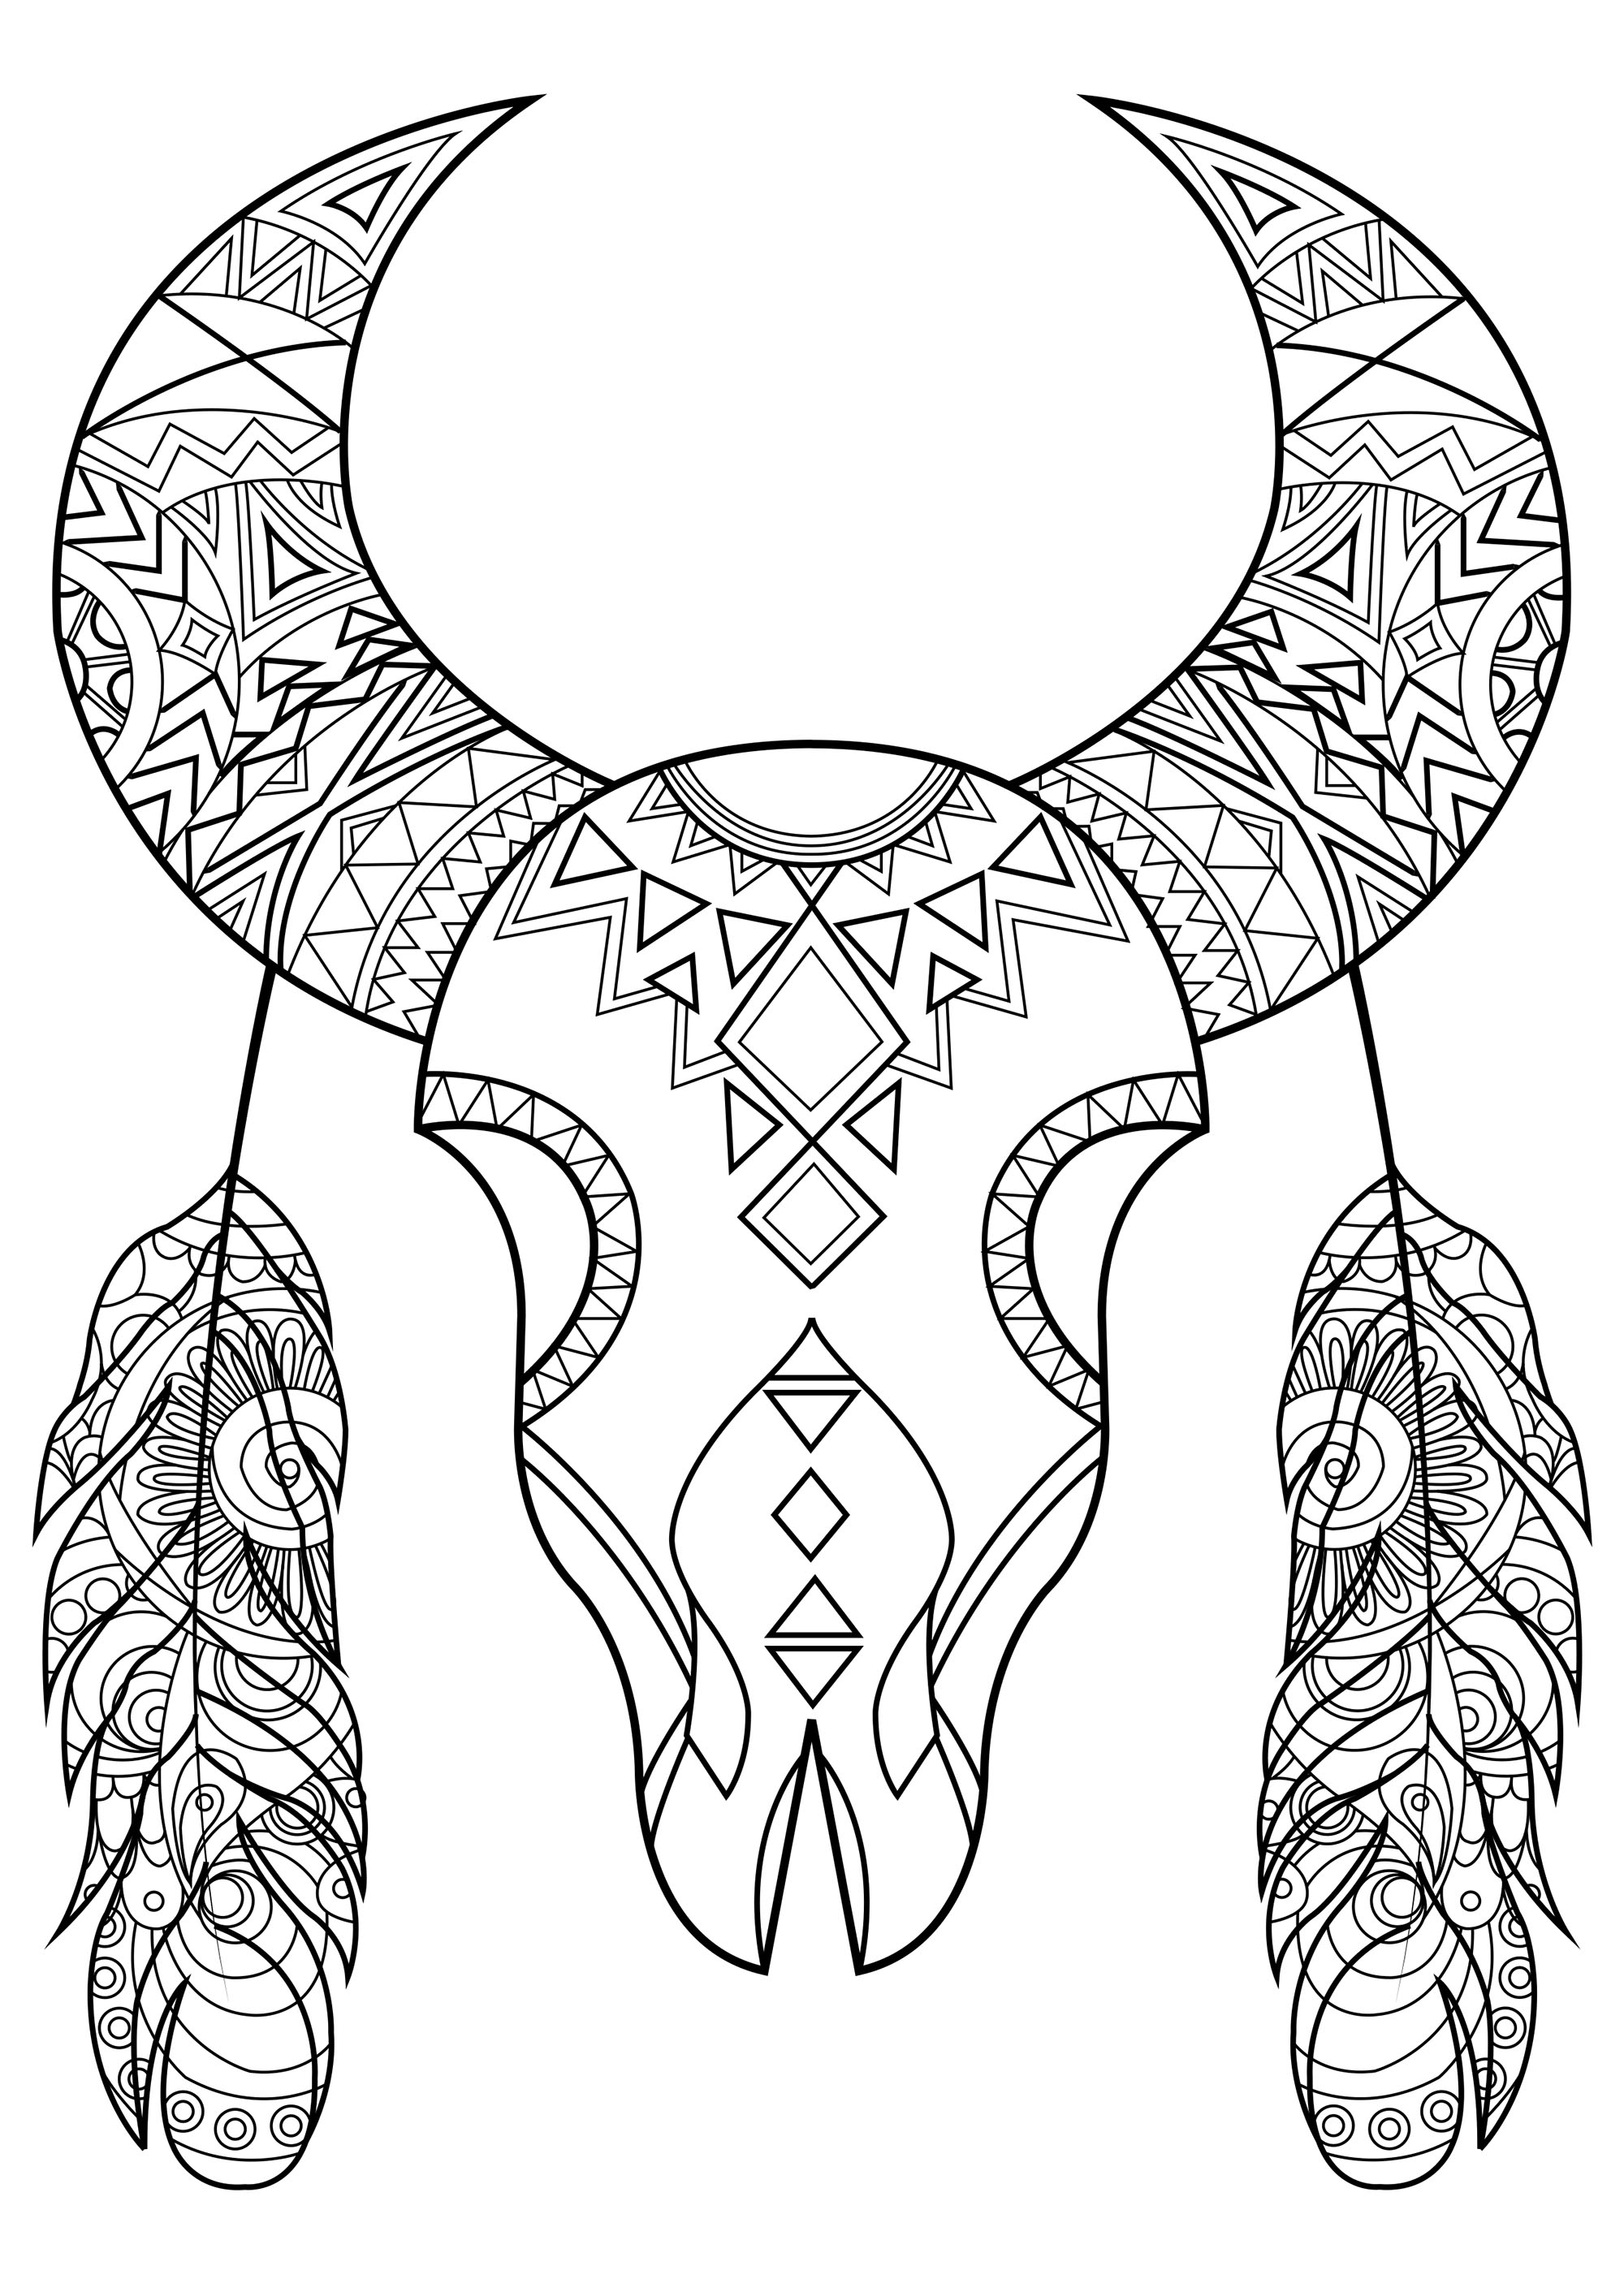 native-american-mandala-coloring-pages-357-best-images-about-native